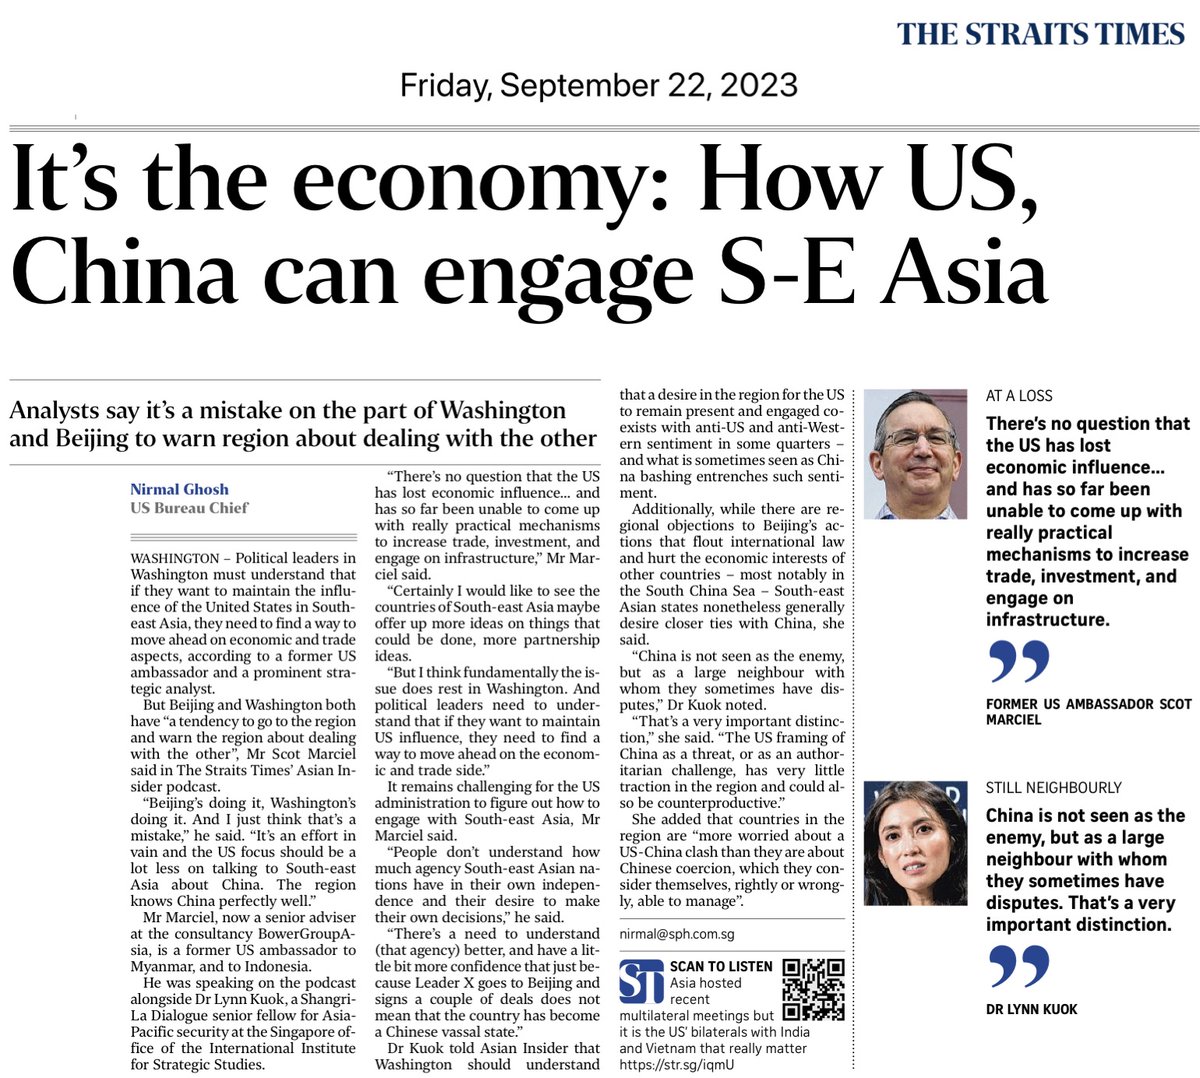 I spoke on the Asian Insider podcast, alongside fmr US amb @MarcielScot, on the #ASEAN & #G20 summits, #Myanmar, US economic strategy, & what the US should understd abt #SoutheastAsia. Read my take on the last question in @straits_times. For the full podcast, pls scan QR code👇